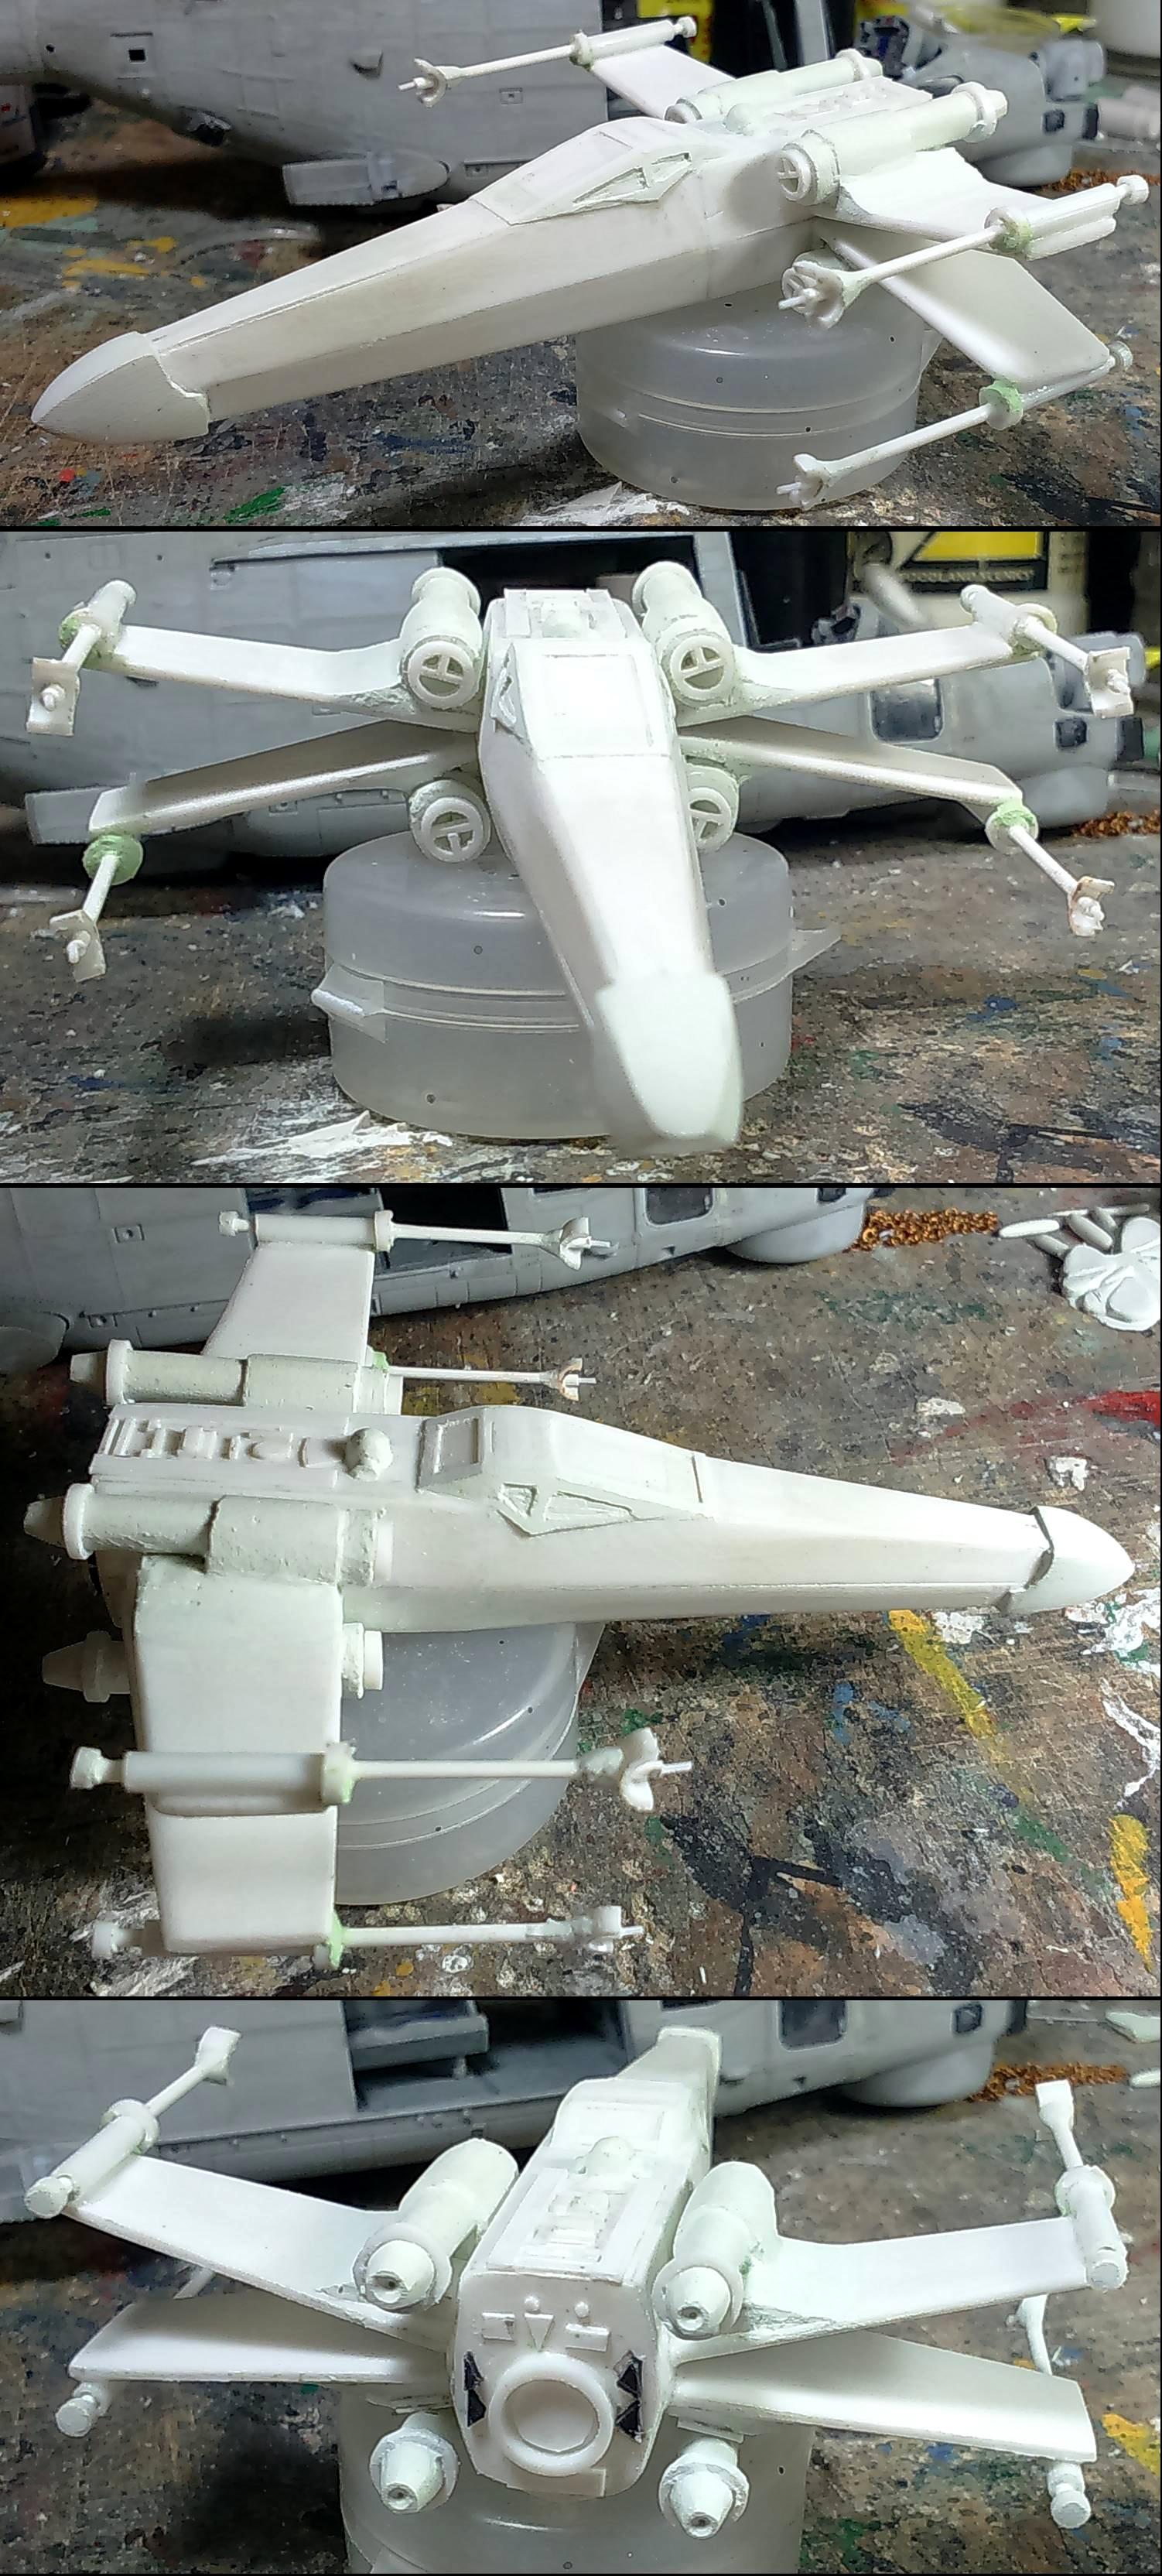 X-shaped space fighter wip 3